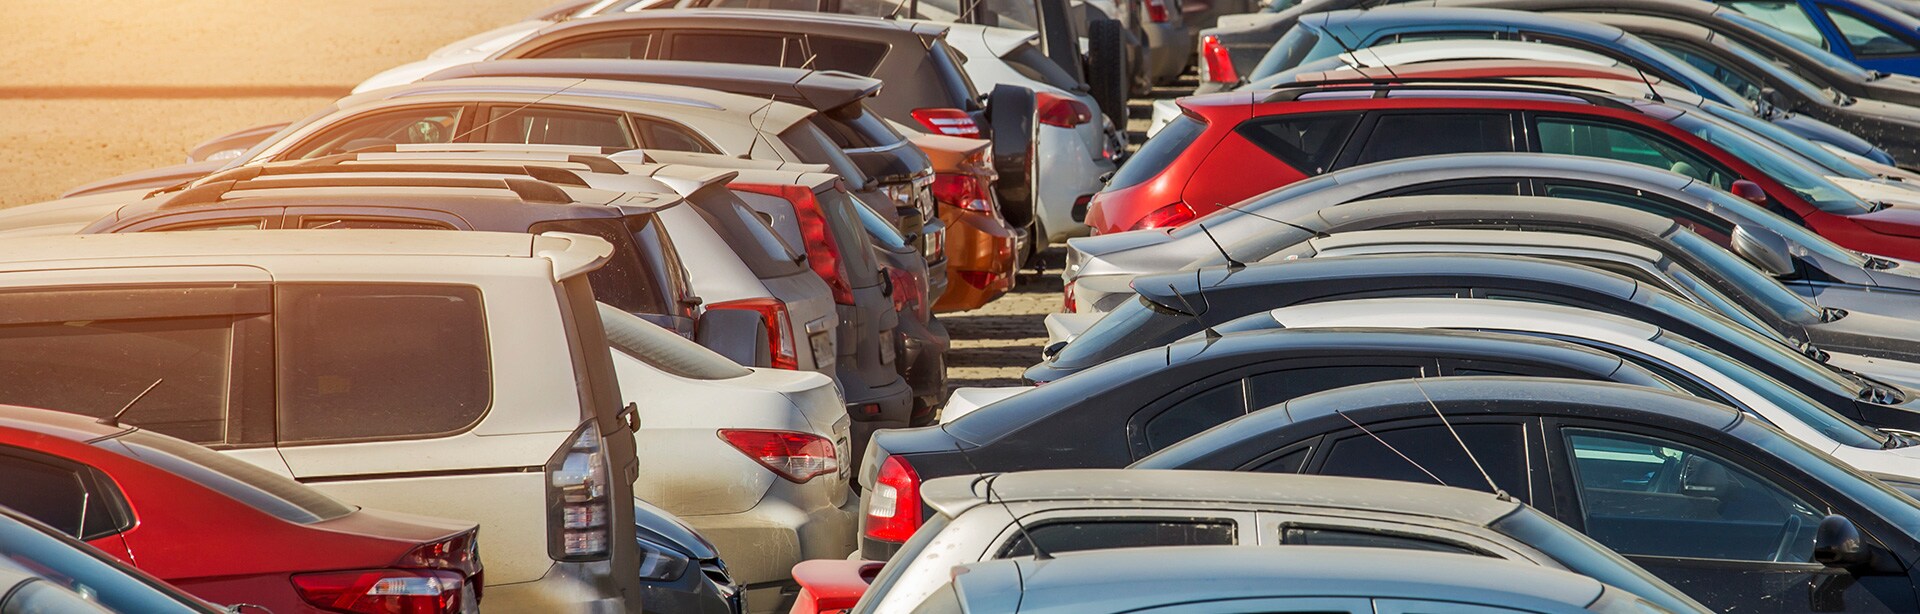 Why Buy Your Next Used Car from a Dealership?